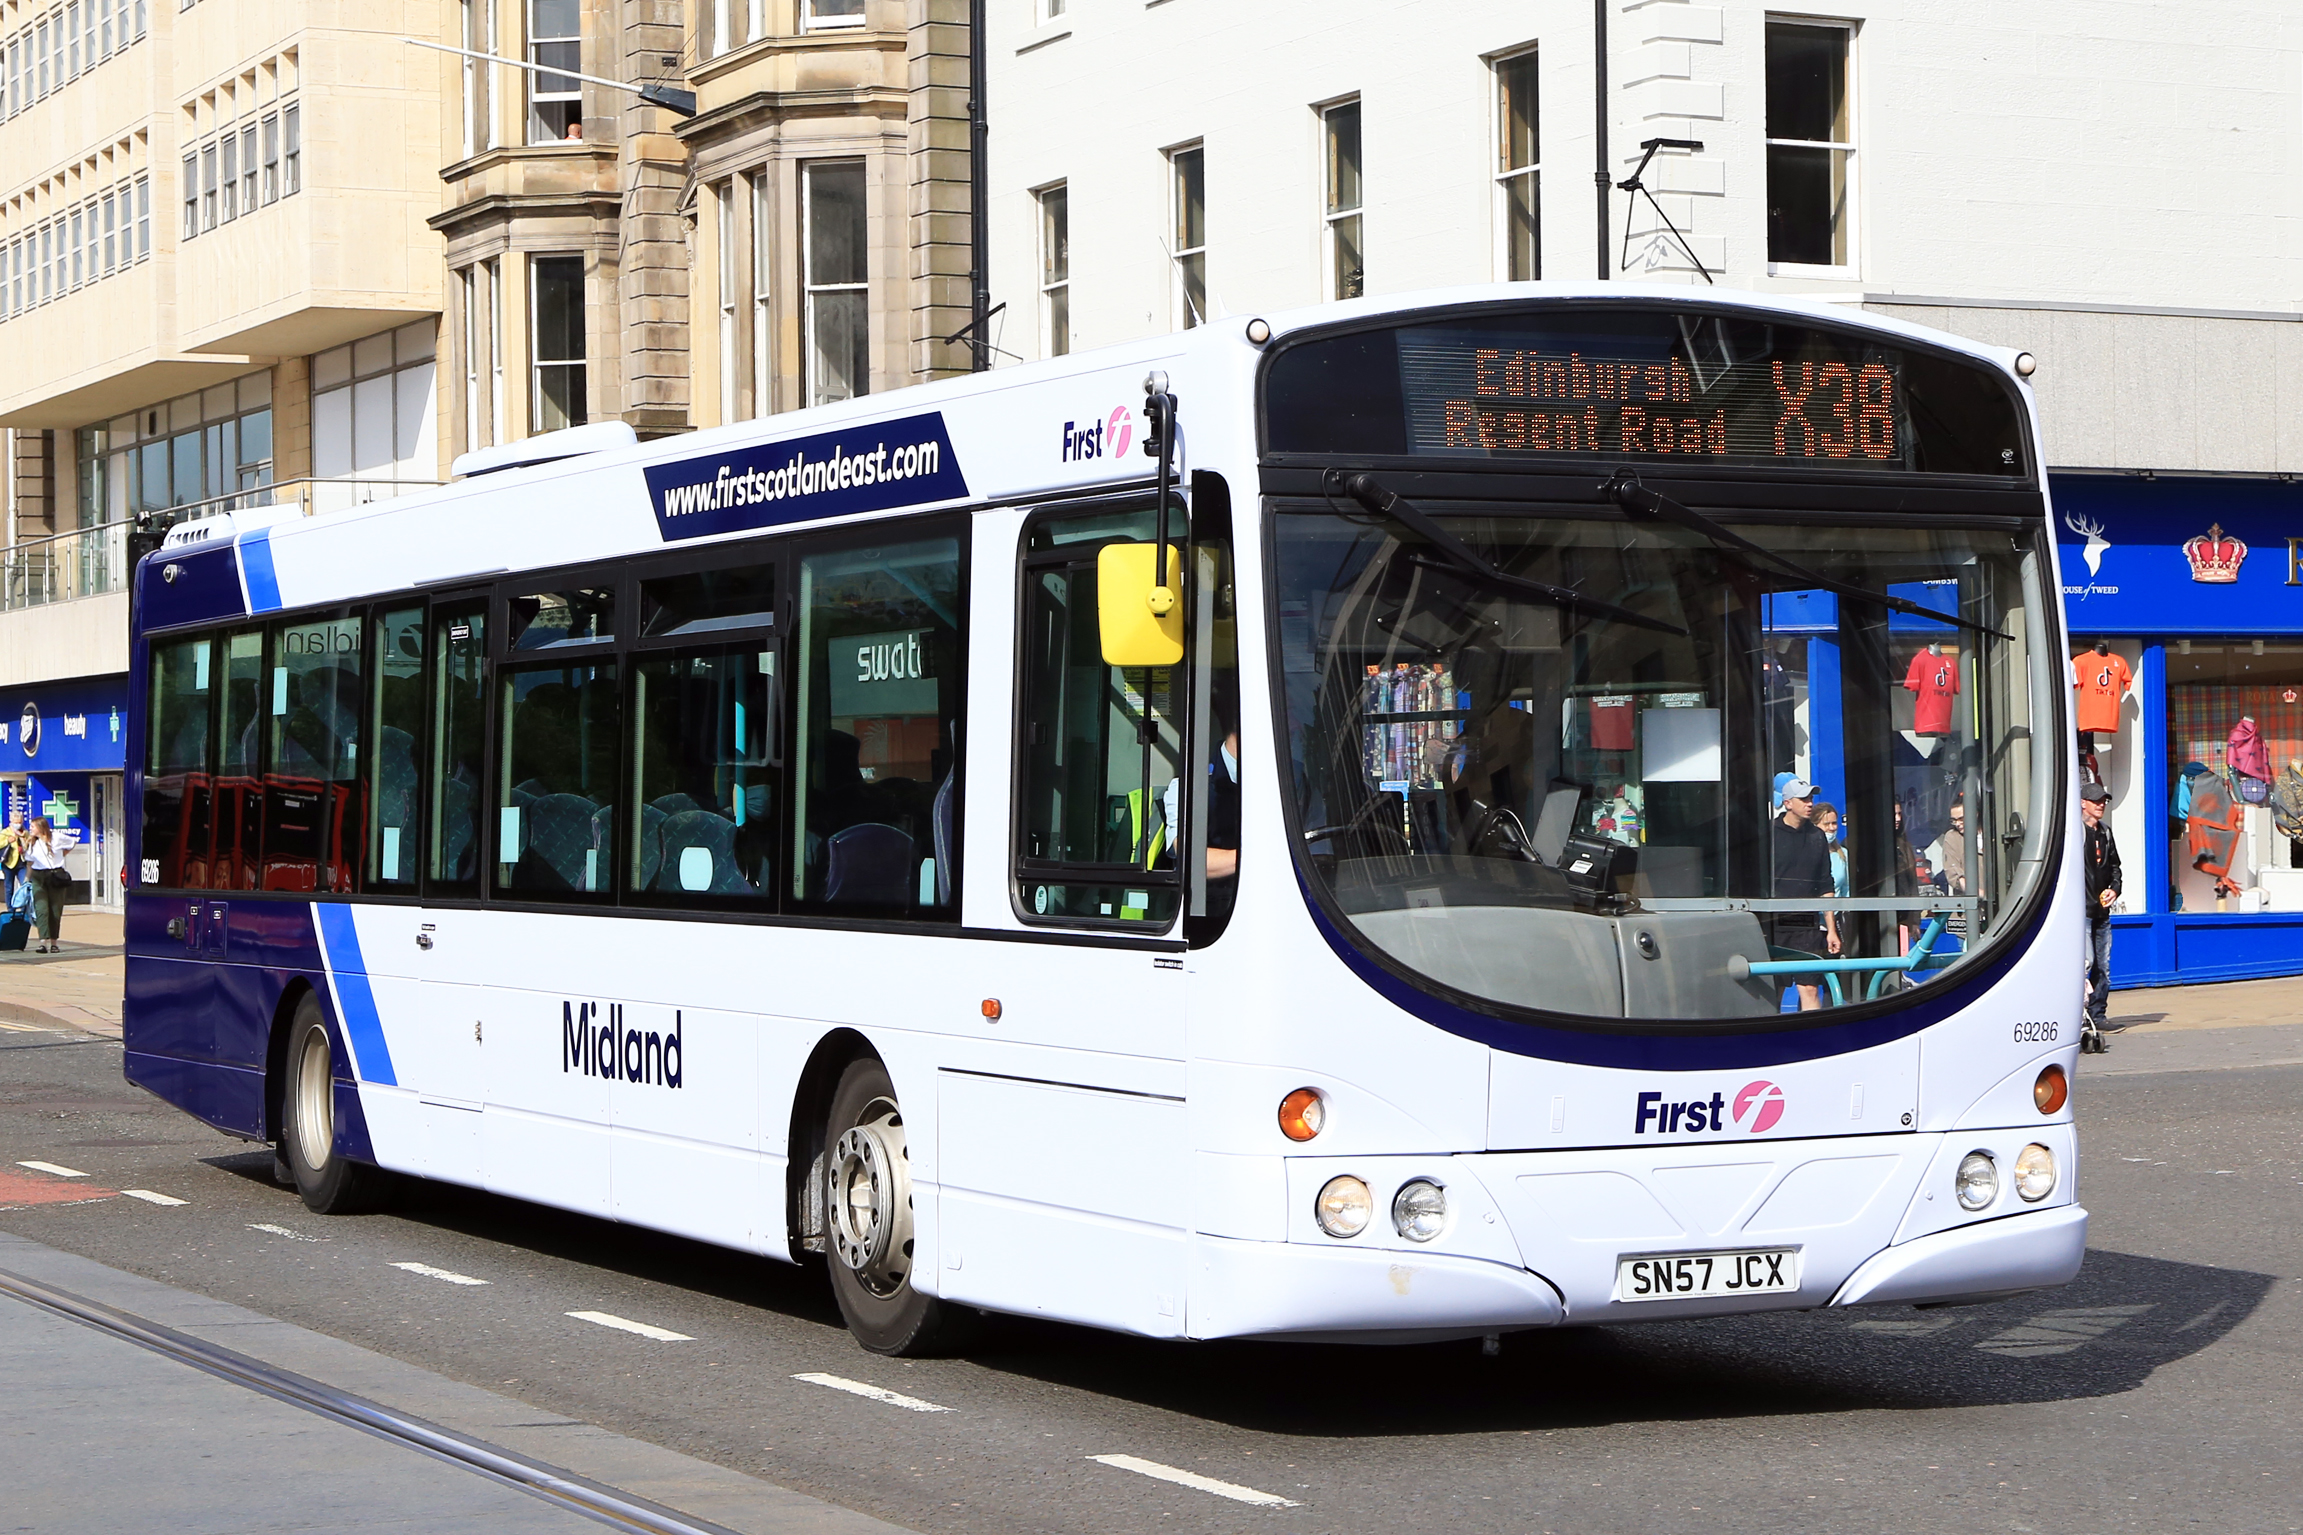 McGill’s to buy First Scotland East